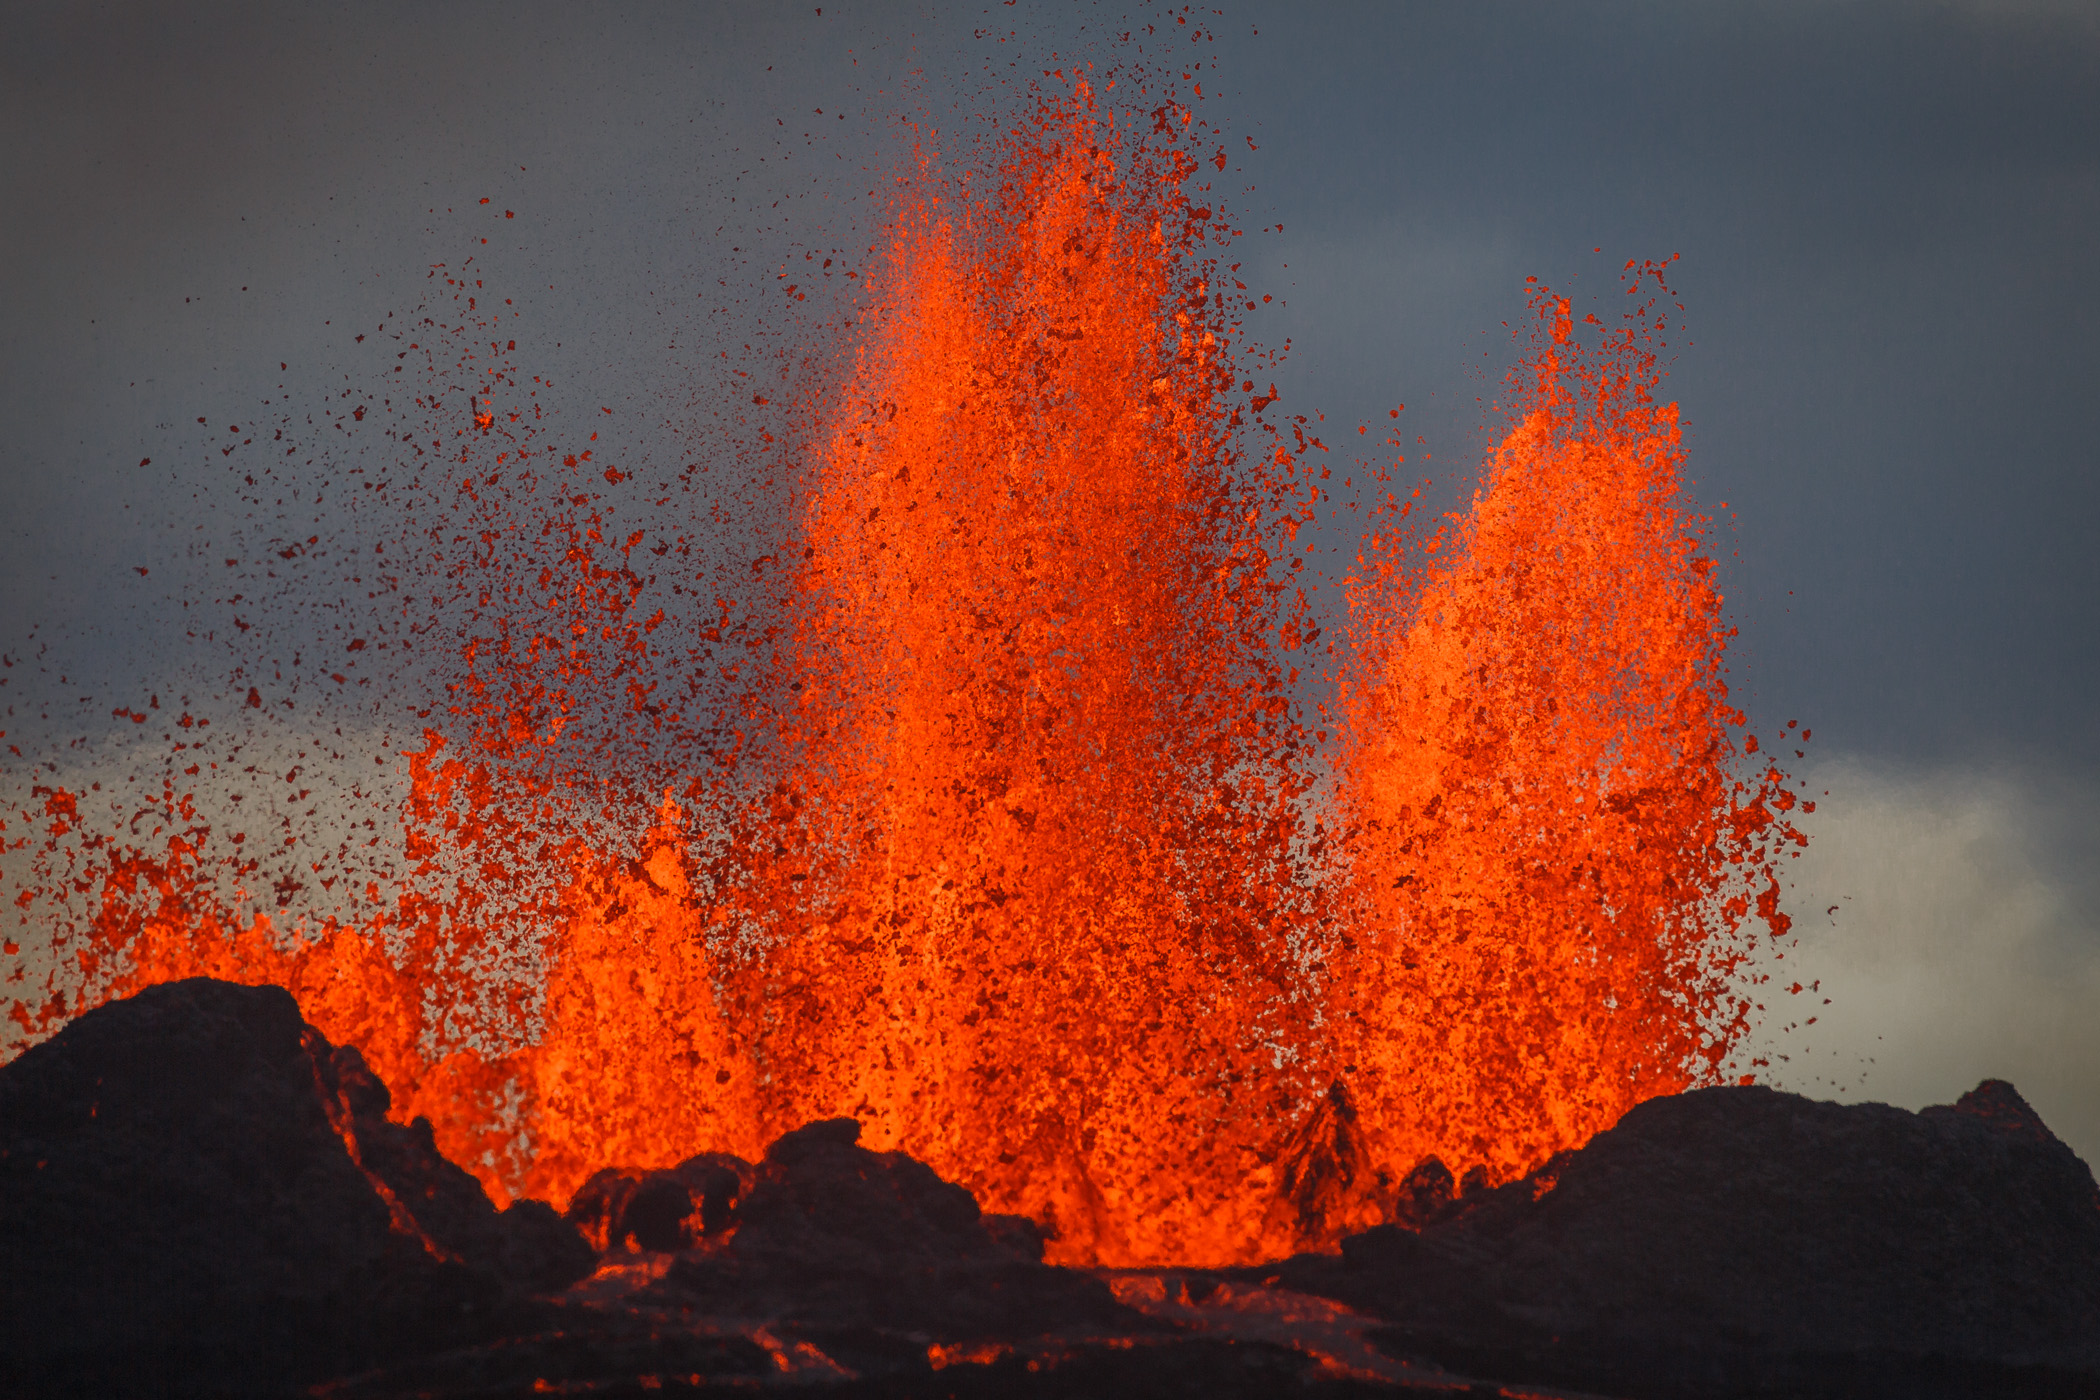 Lava erupts up to 100 meters in the air at Bardarbunga, Sept. 2, 2014.